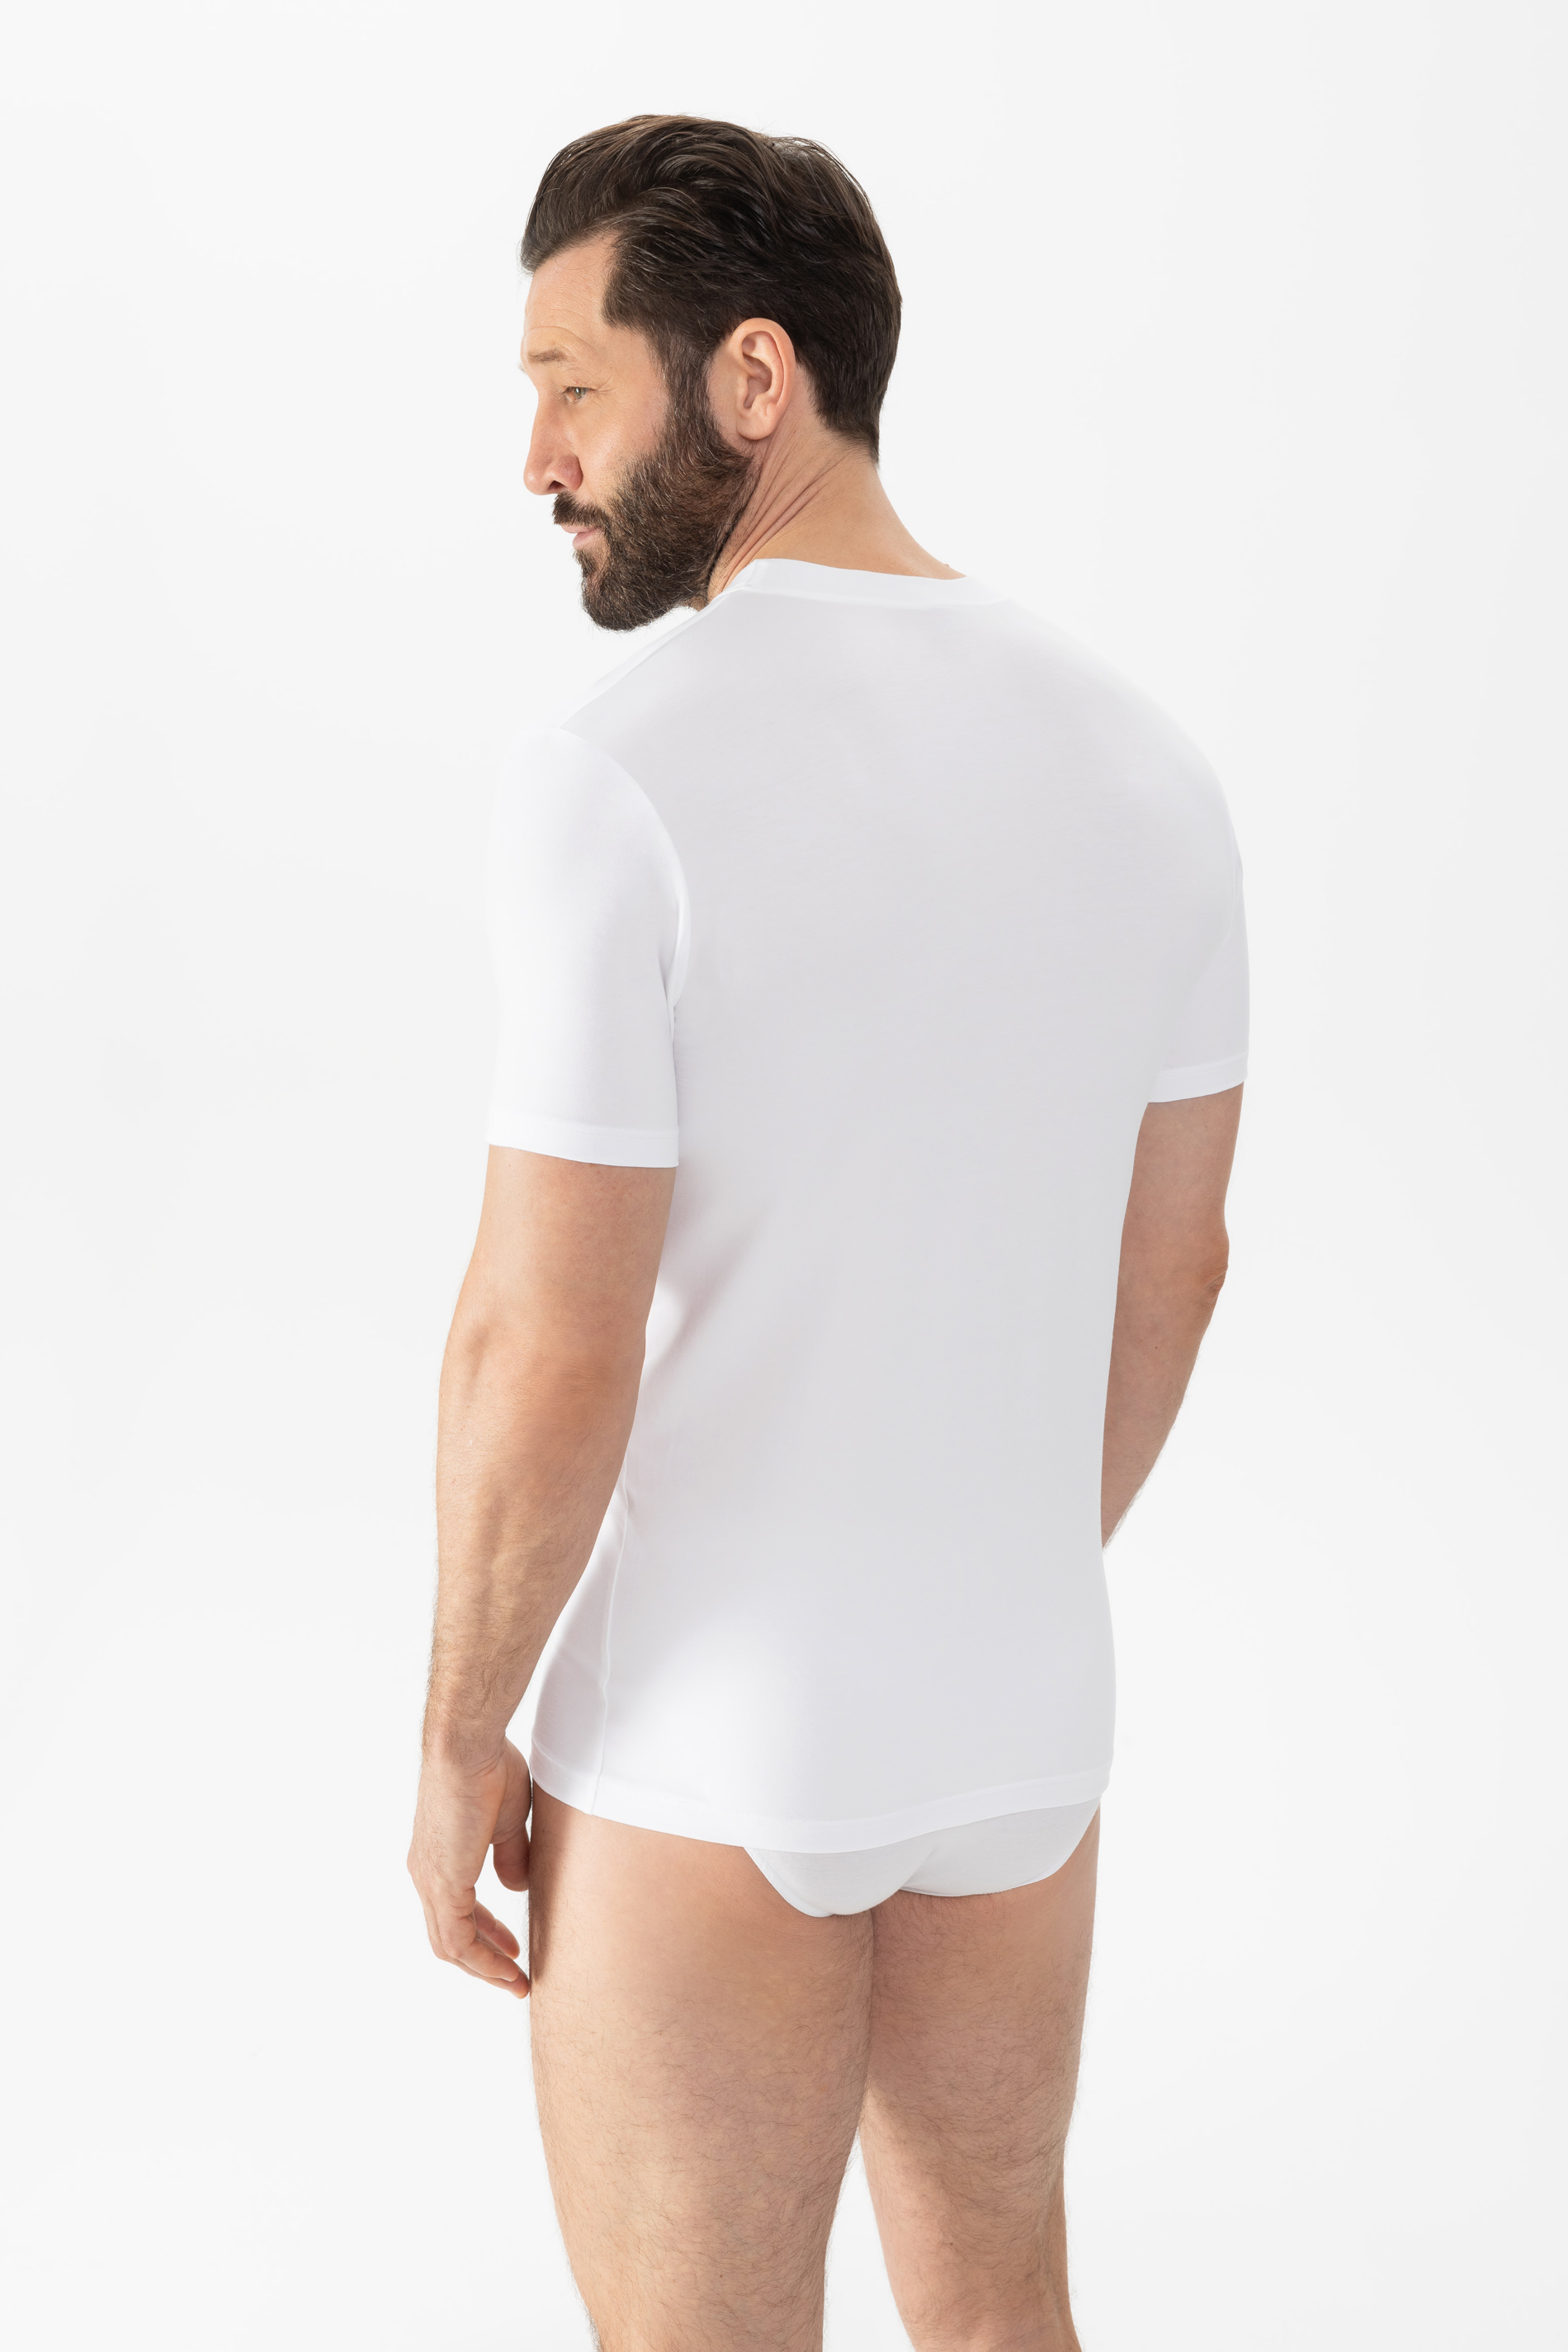 Olympic shirt White Serie Dry Cotton Rear View | mey®